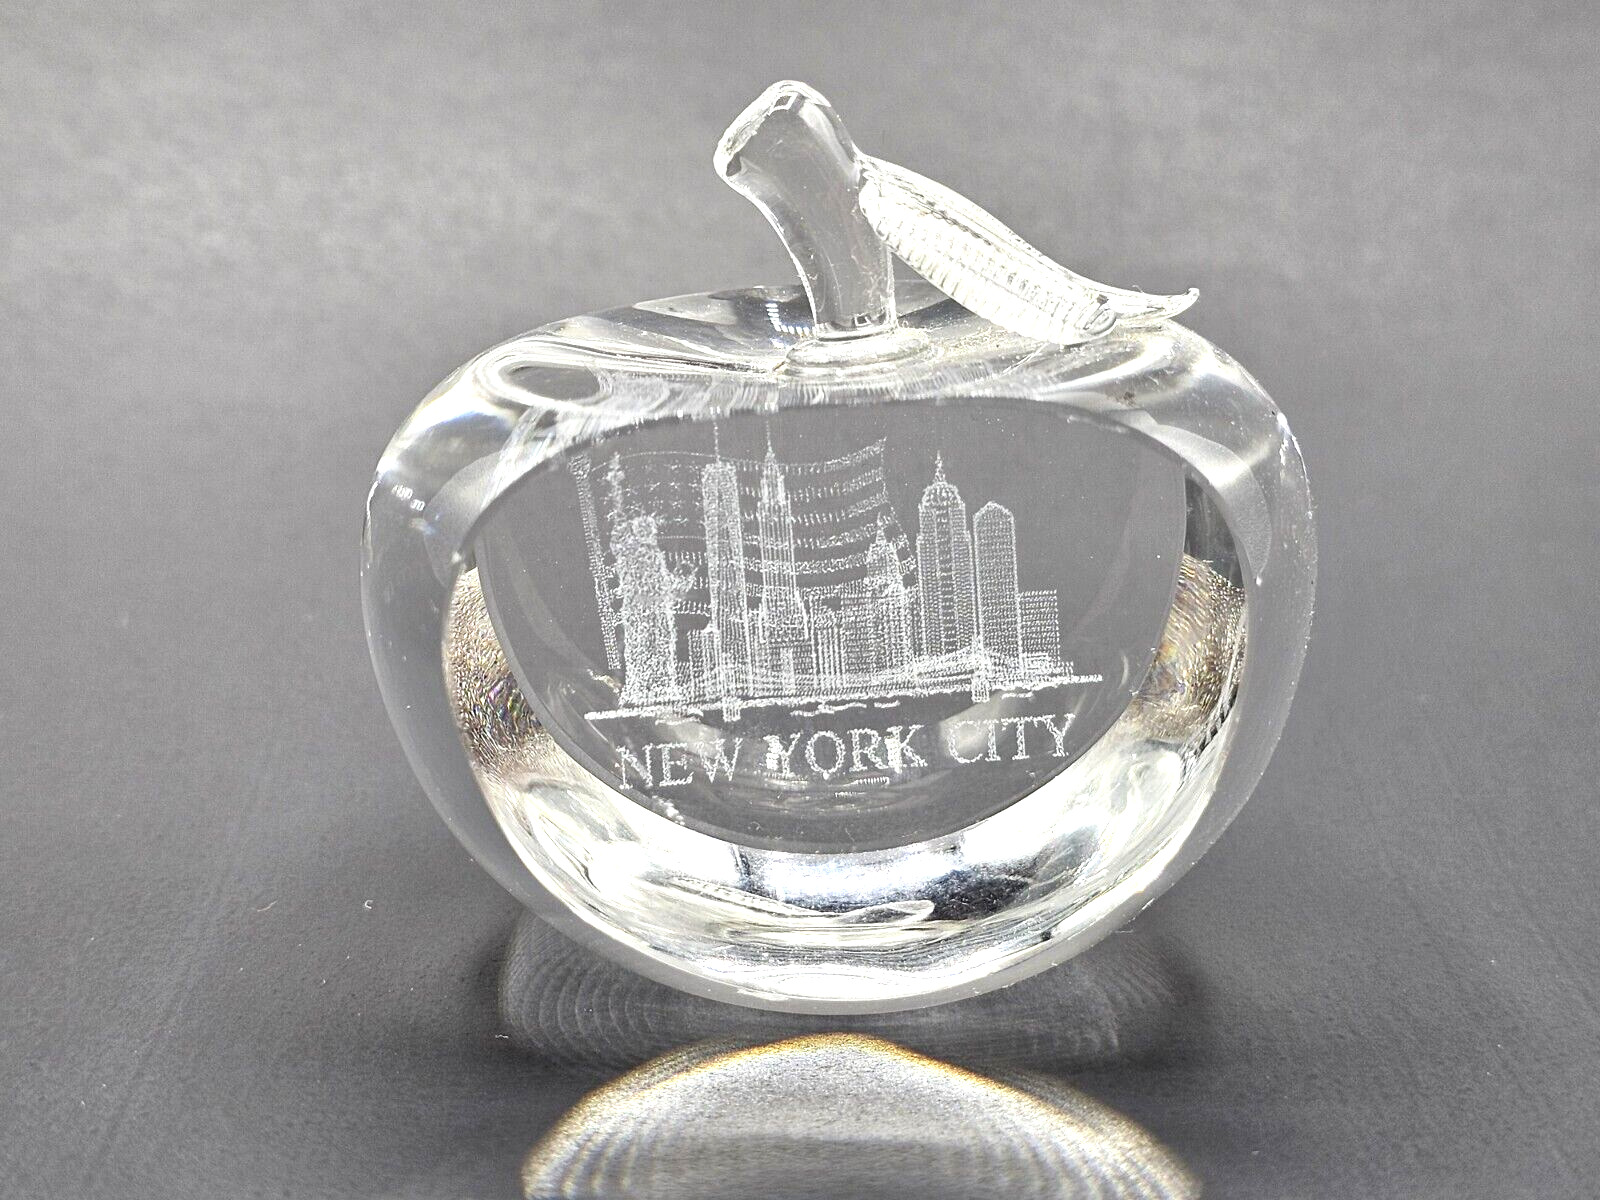 VGUC Laser Etched Crystal Apple 3D NYC Statue of Liberty Empire State Bldg Flag